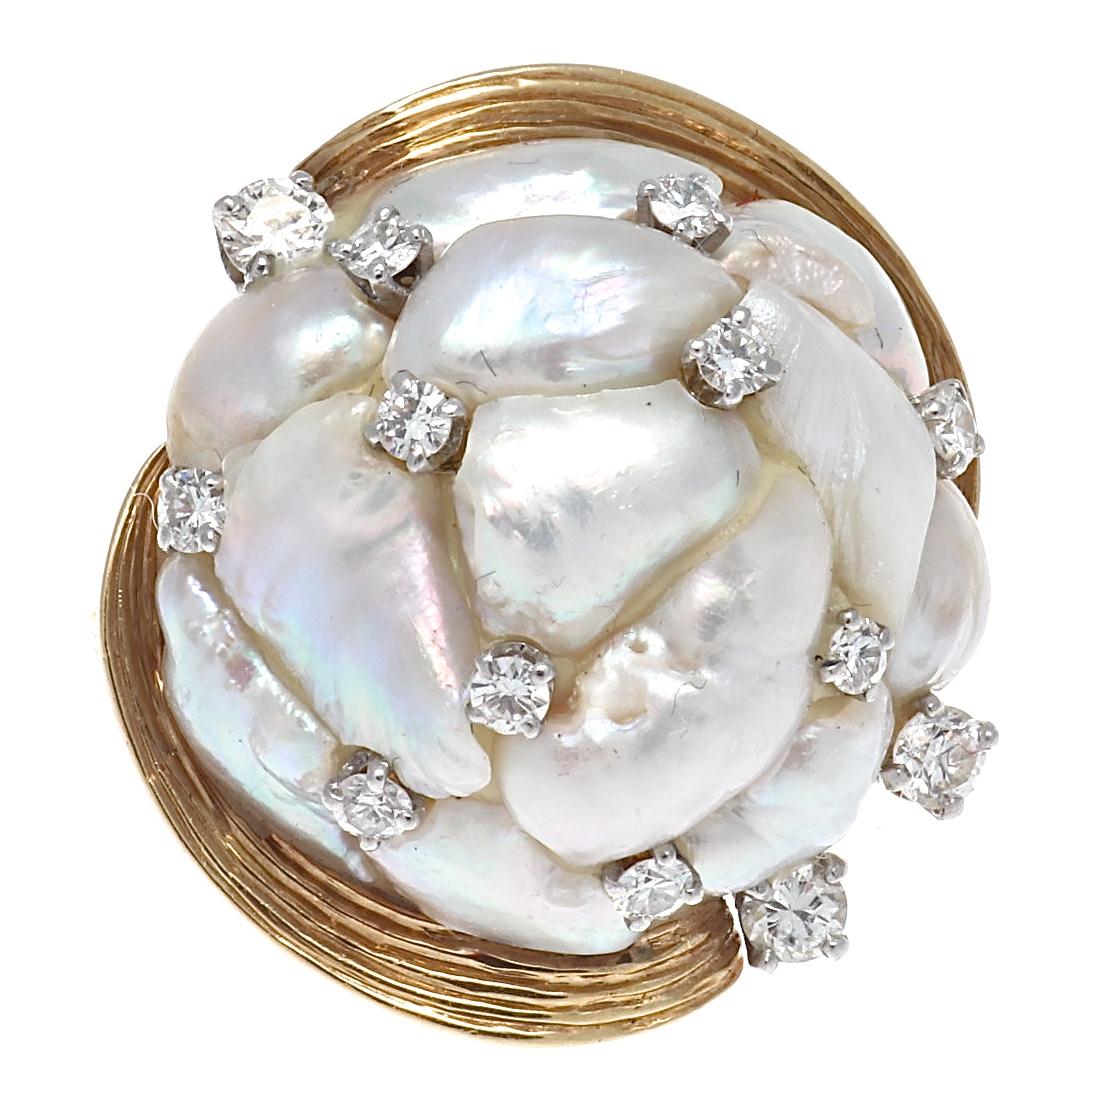 A study in exquisite form, this lustrous pearl and diamond gold ring from Ruser features Mississippi River pearls and near colorless diamonds to create a fantasy ring that looks as good as whipped cream tastes. This vintage beauty is a gift from the